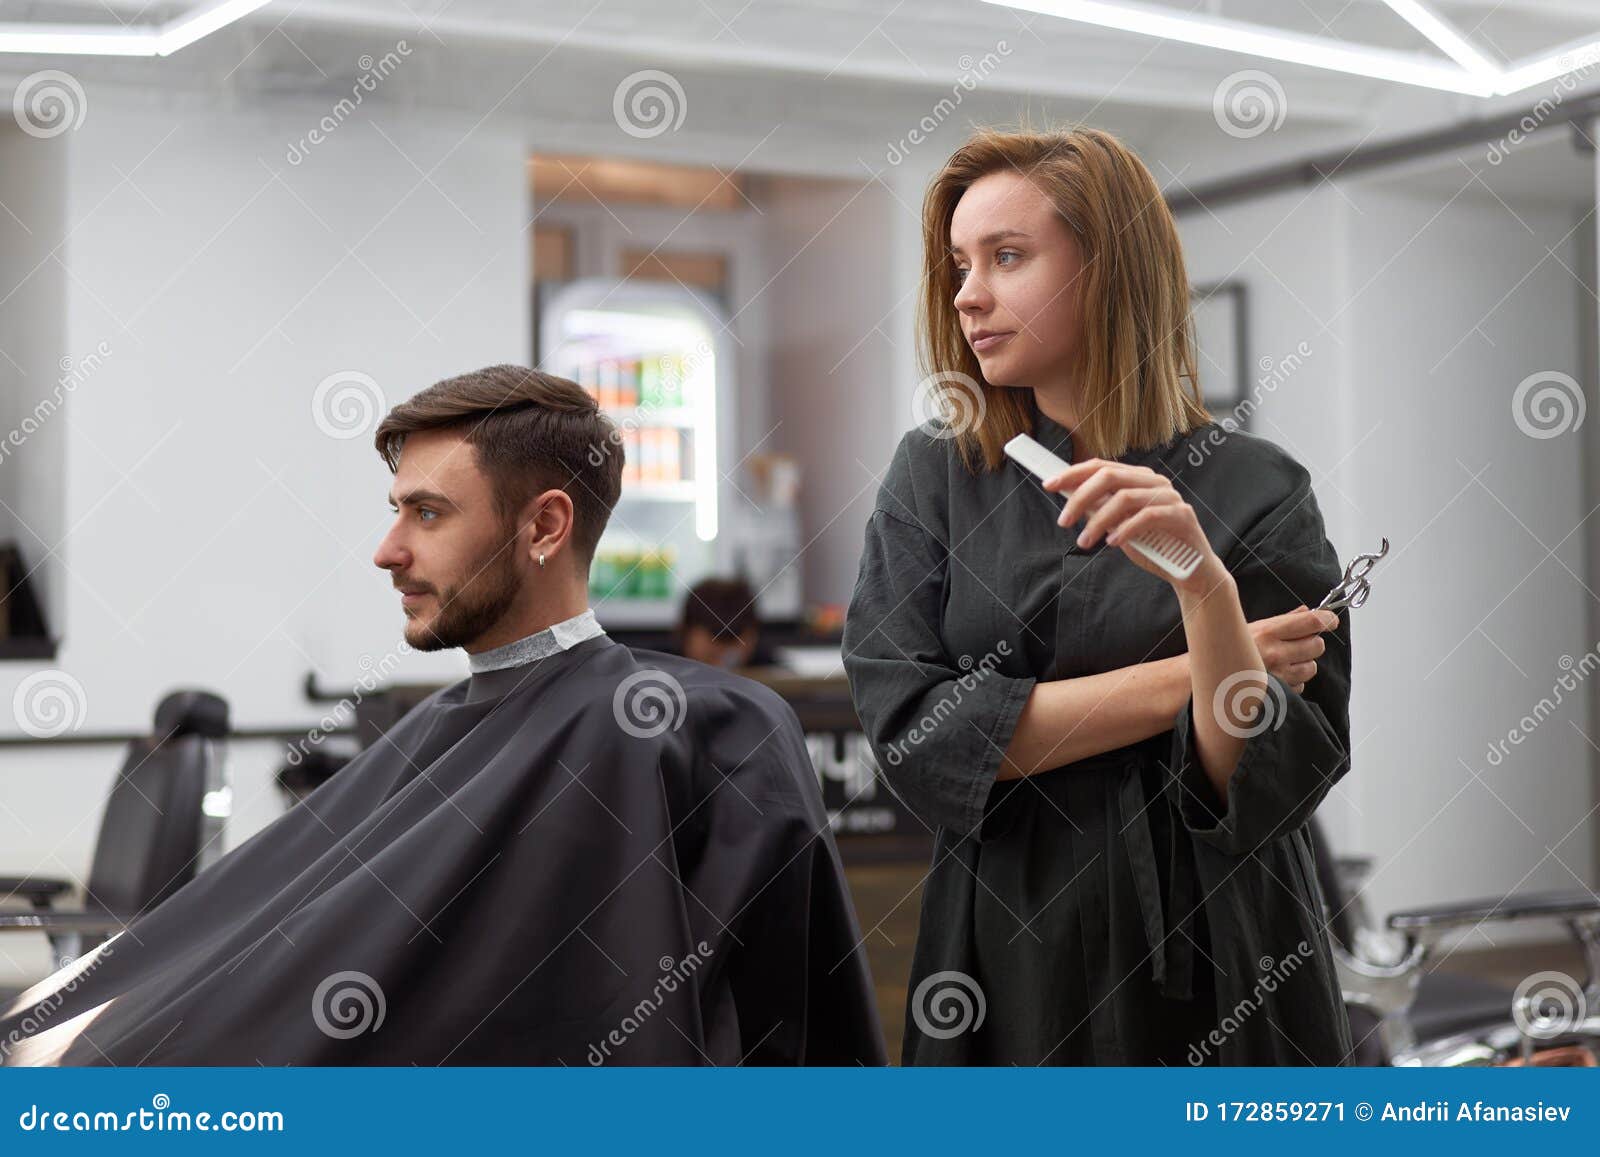 Handsome Blue Eyed Man Sitting in Barber Shop. Hairstylist Hairdresser Woman  Cutting His Hair. Female Barber Stock Image - Image of haircut, lifestyle:  172859271